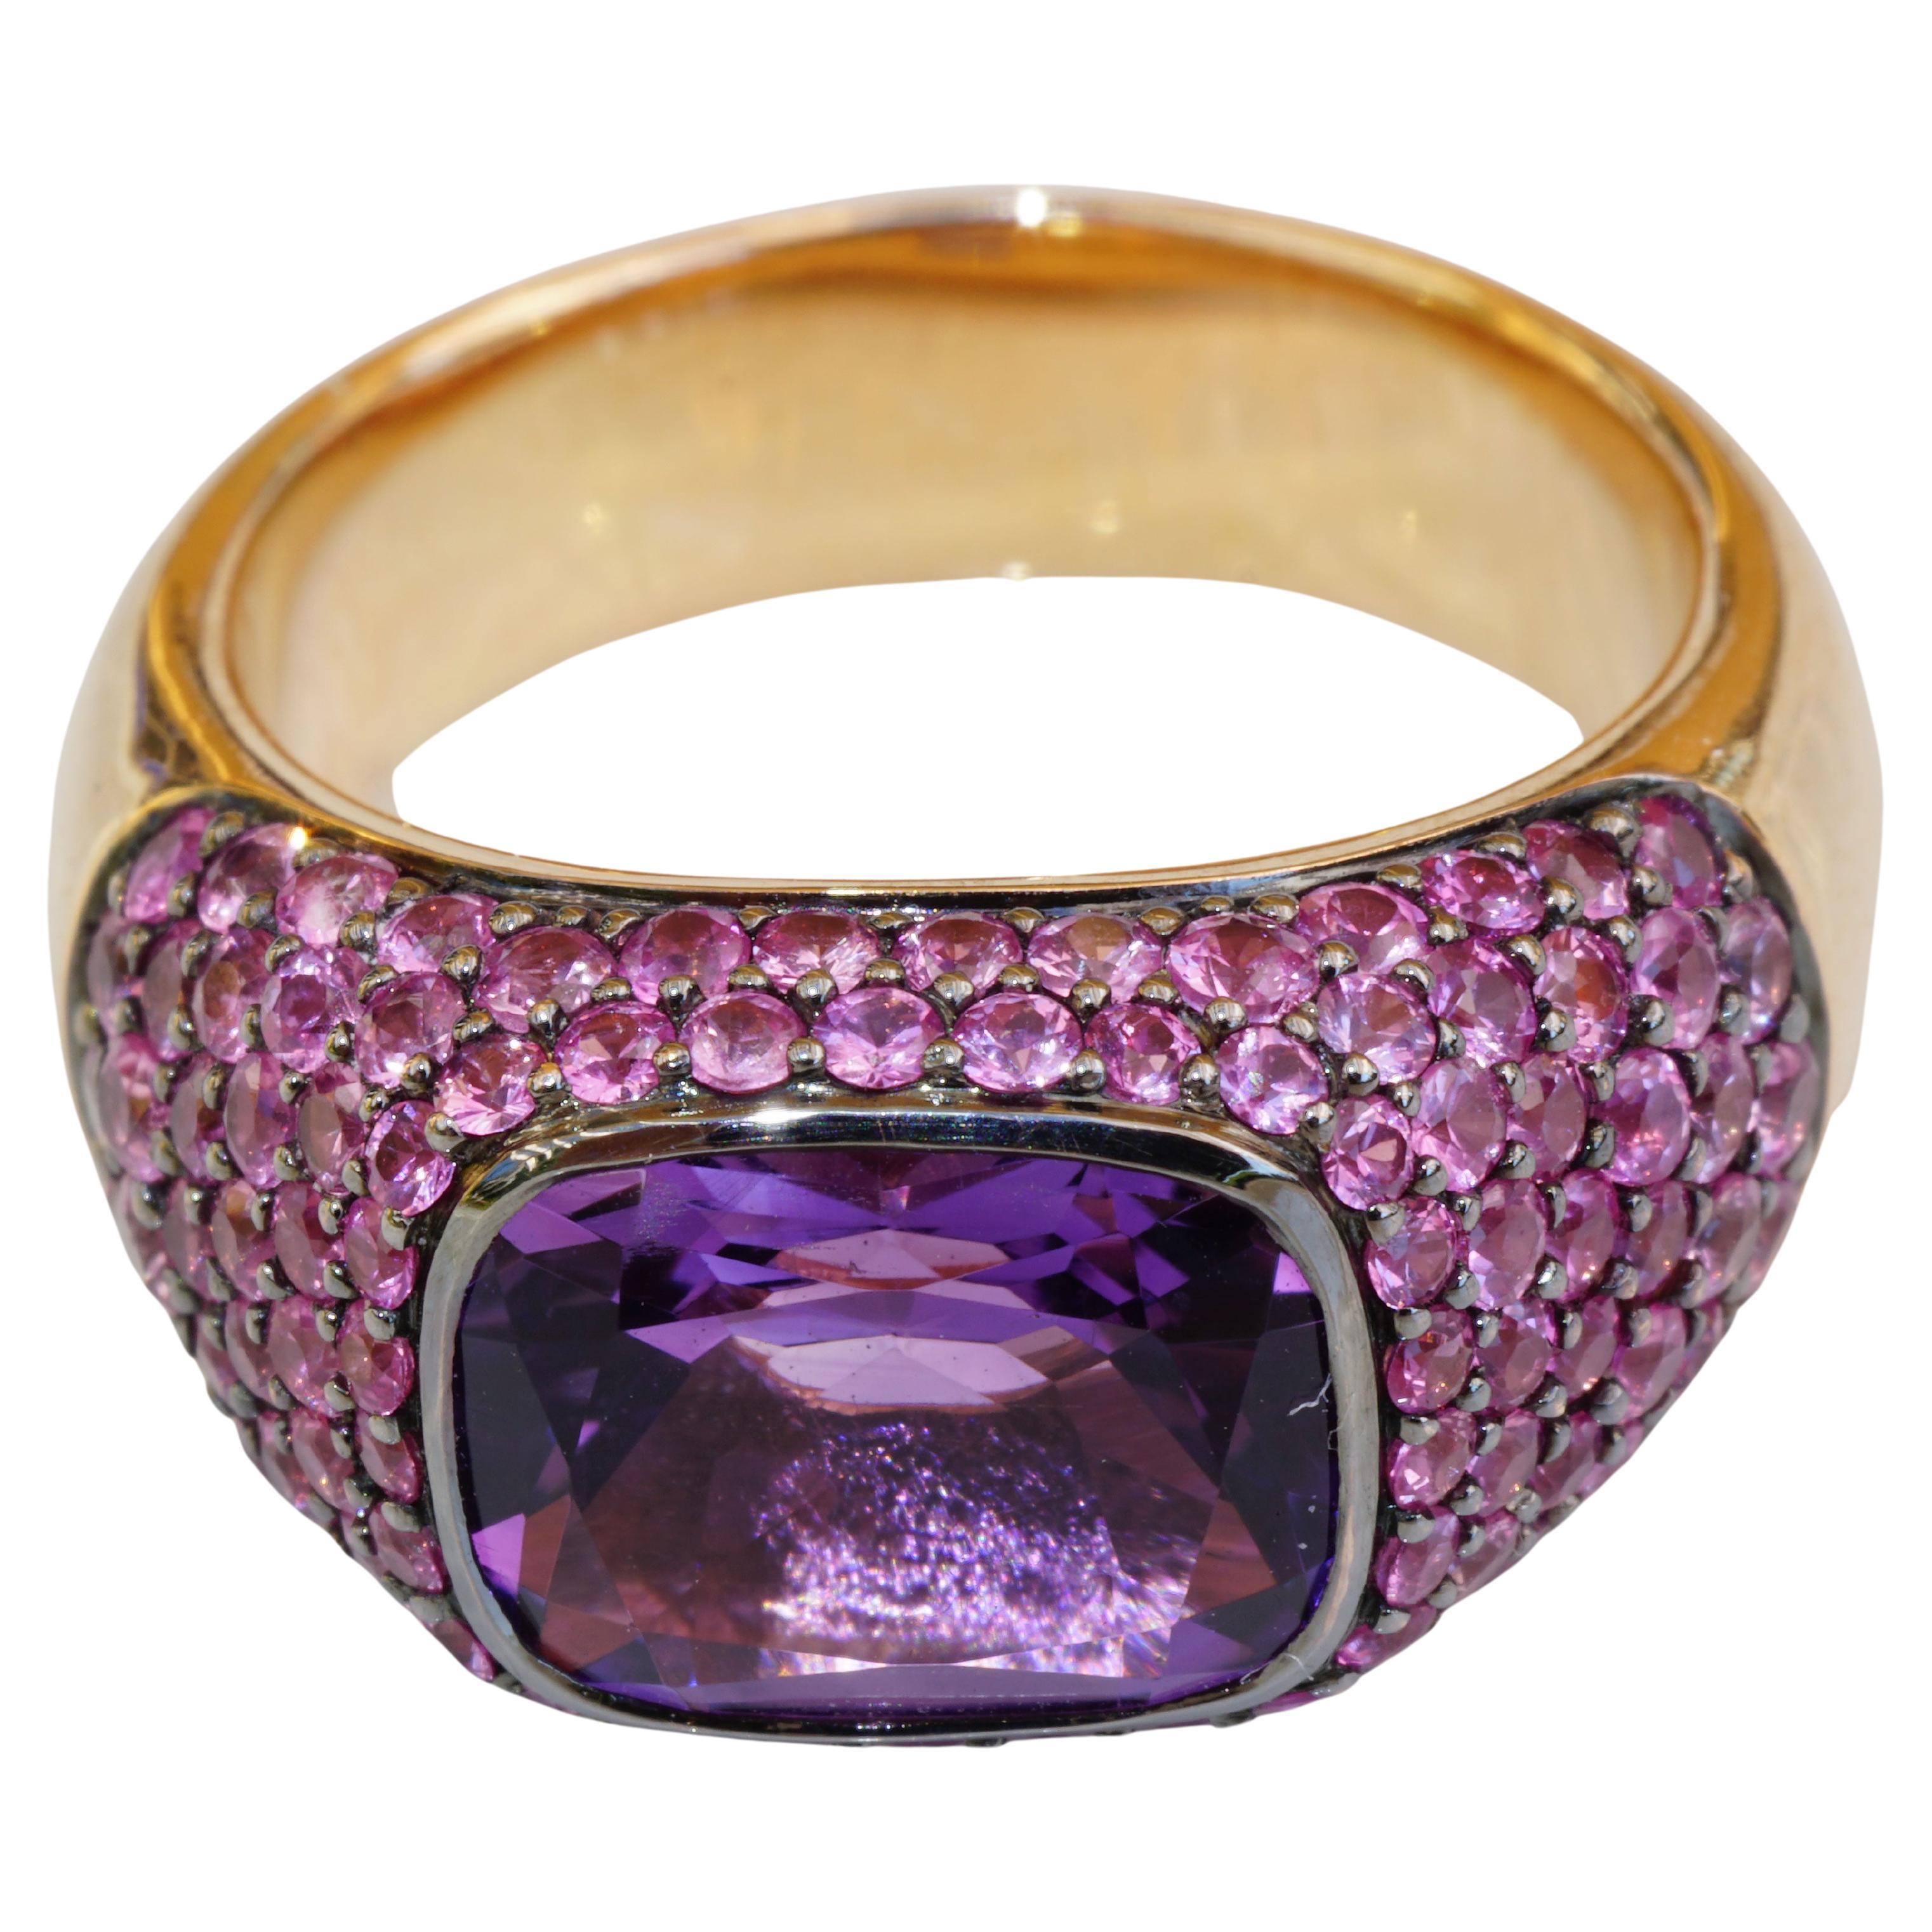 Amethyst-Saphir-Ring 18 Kt Roségold AAA+ Perfect Jewelers Art Made in Valenza im Angebot